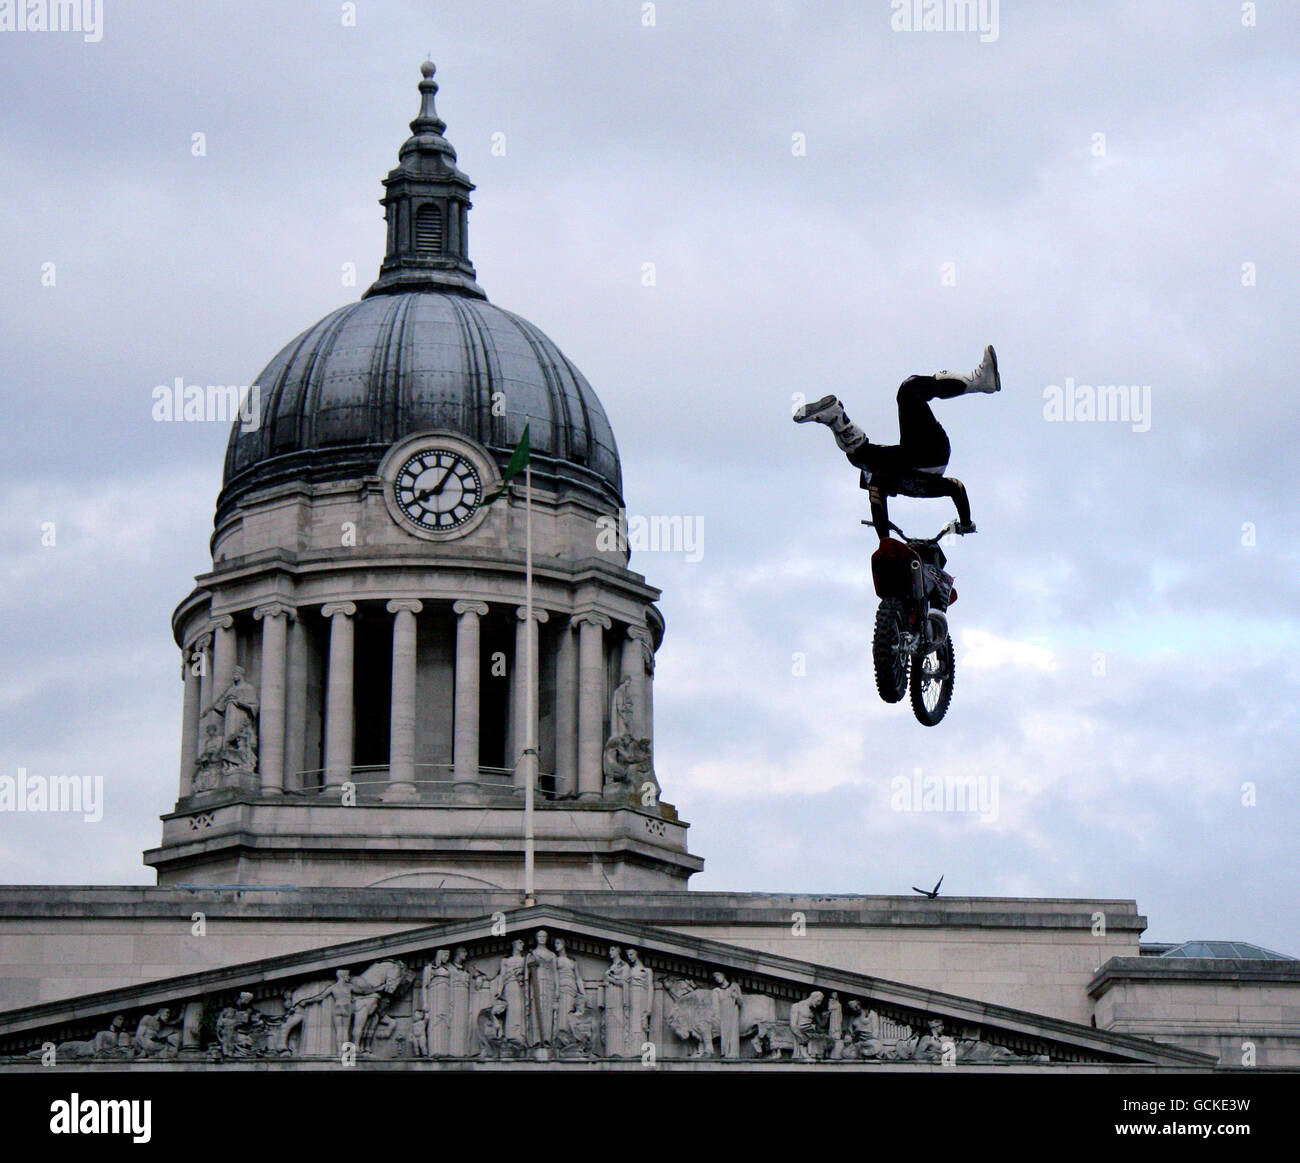 Reiter in Aktion bei den Red Bull X-Fighters Jams auf dem Old Market Square in Nottingham. Stockfoto